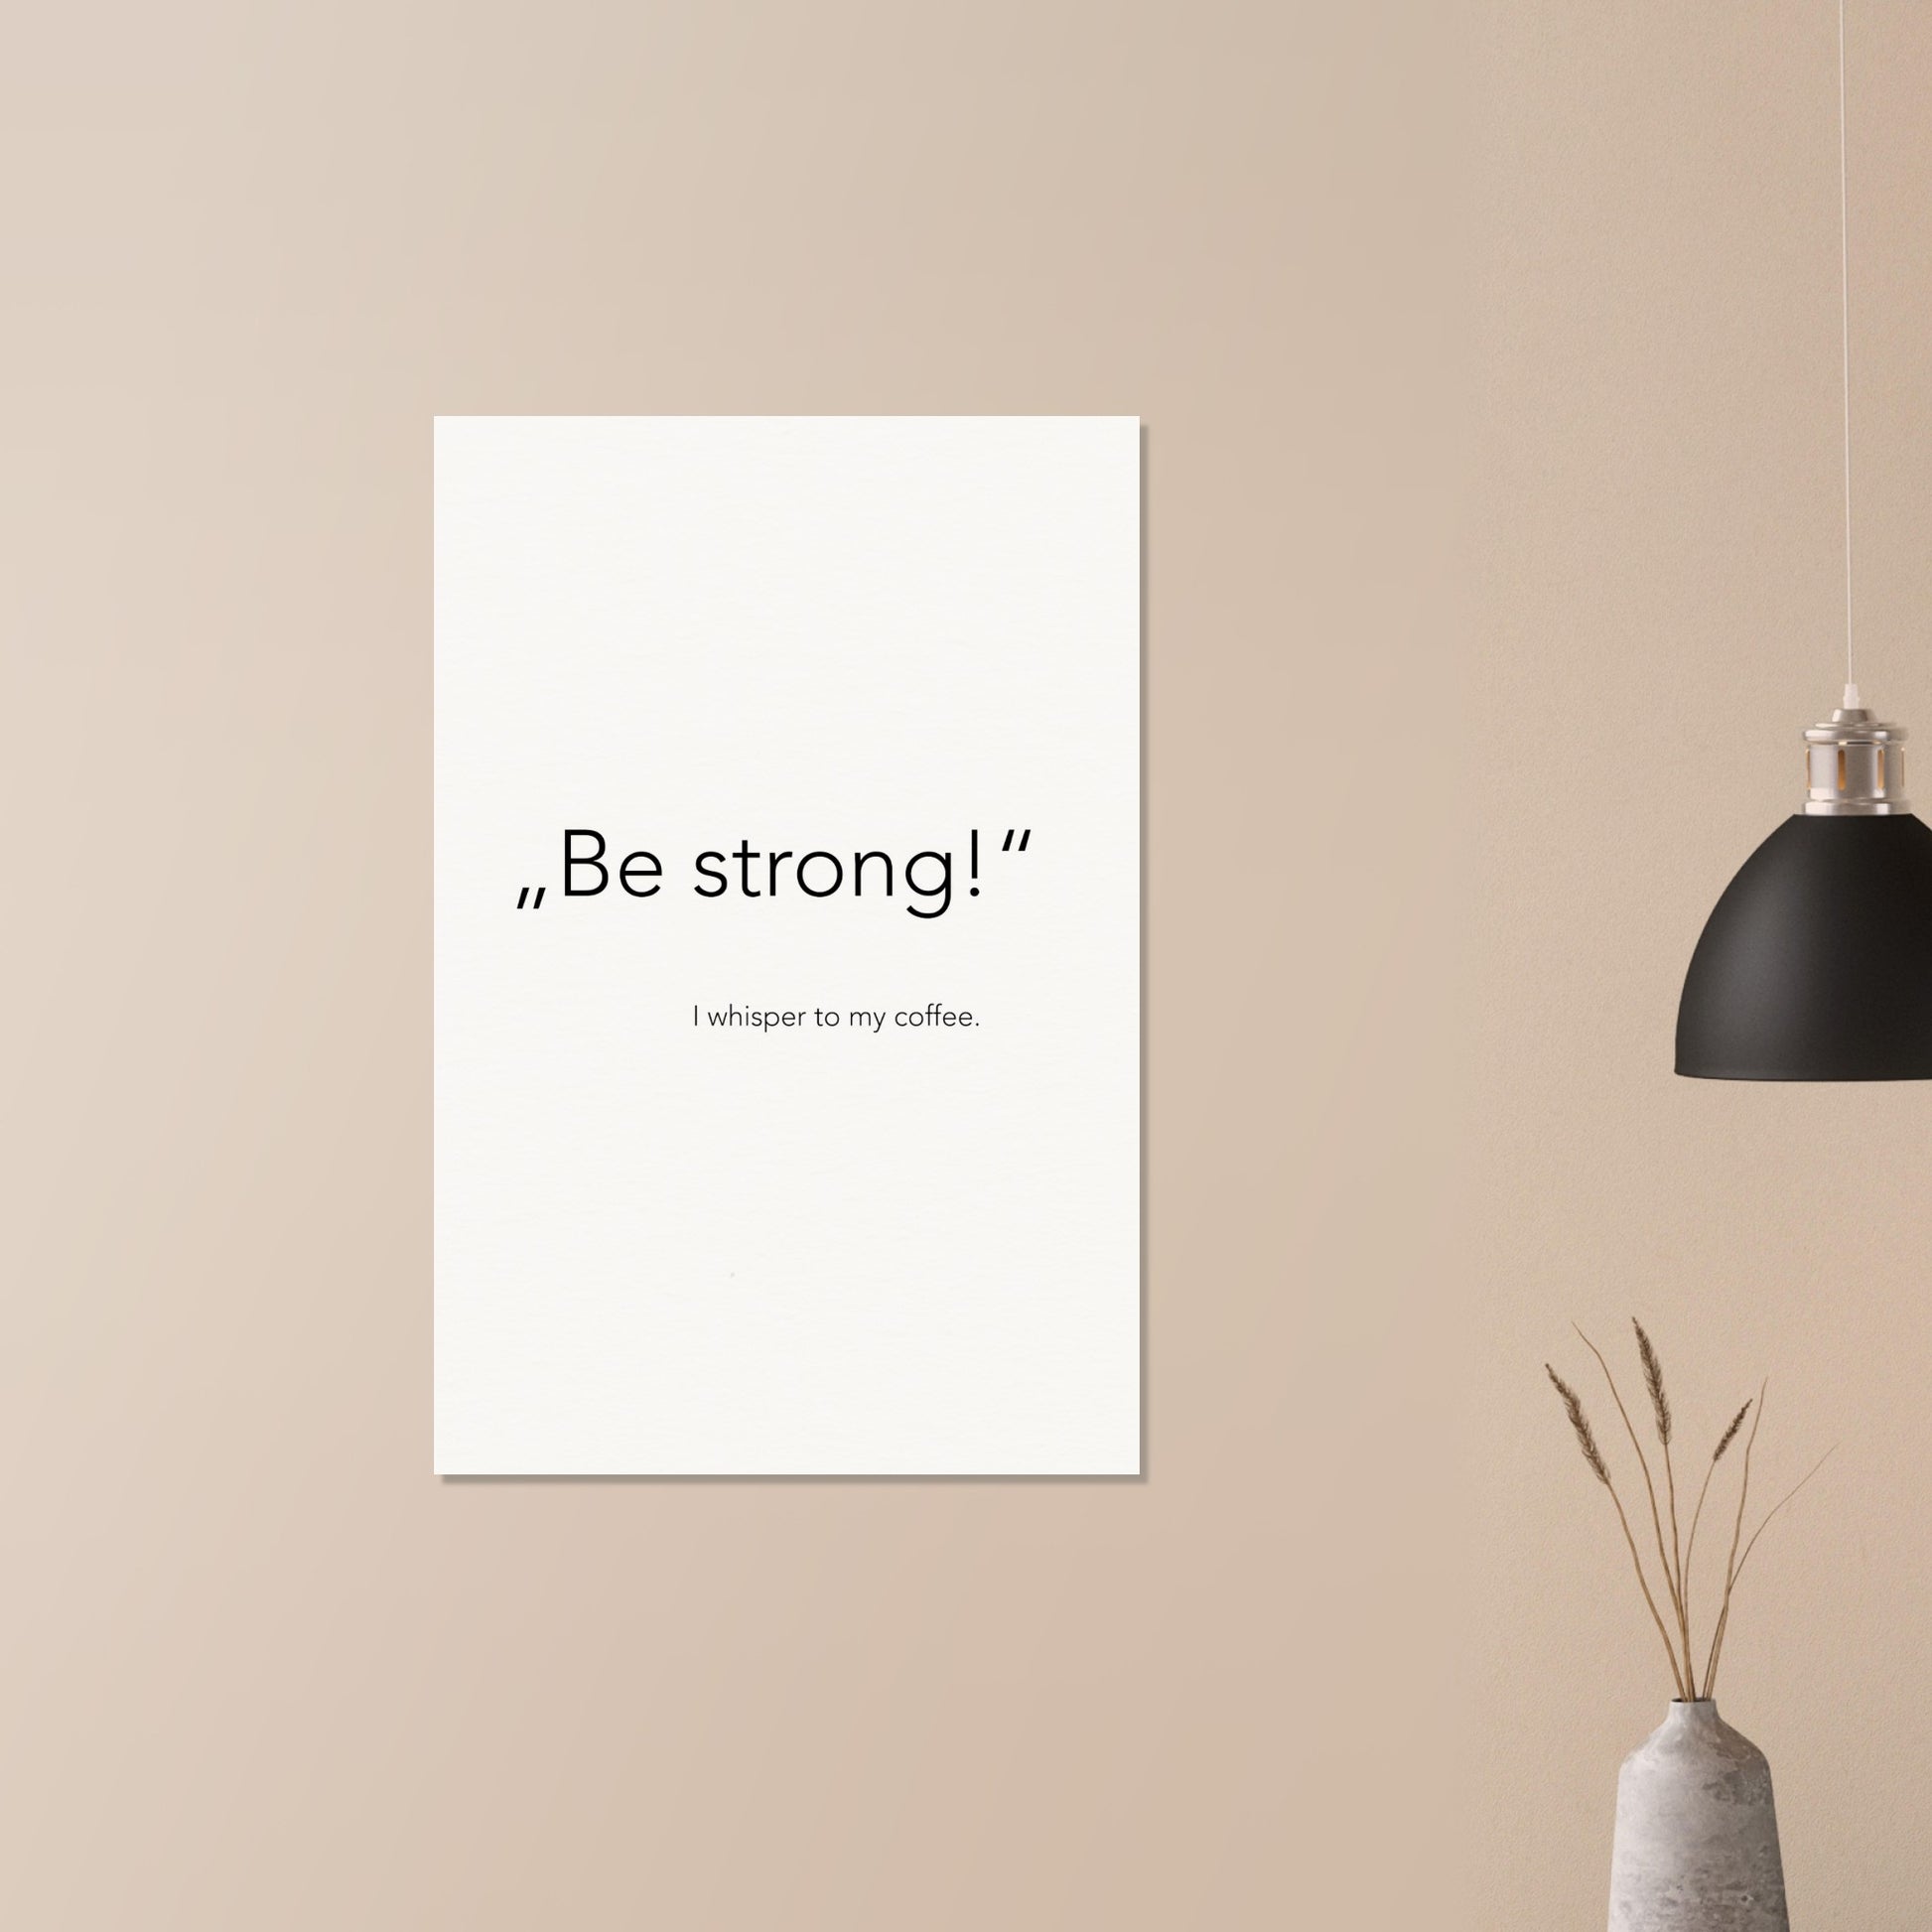 f6e066aPoster - „Be strong!" - I whisper to my coffee (white)6-7fc9-4430-a099-9408dd5ba803